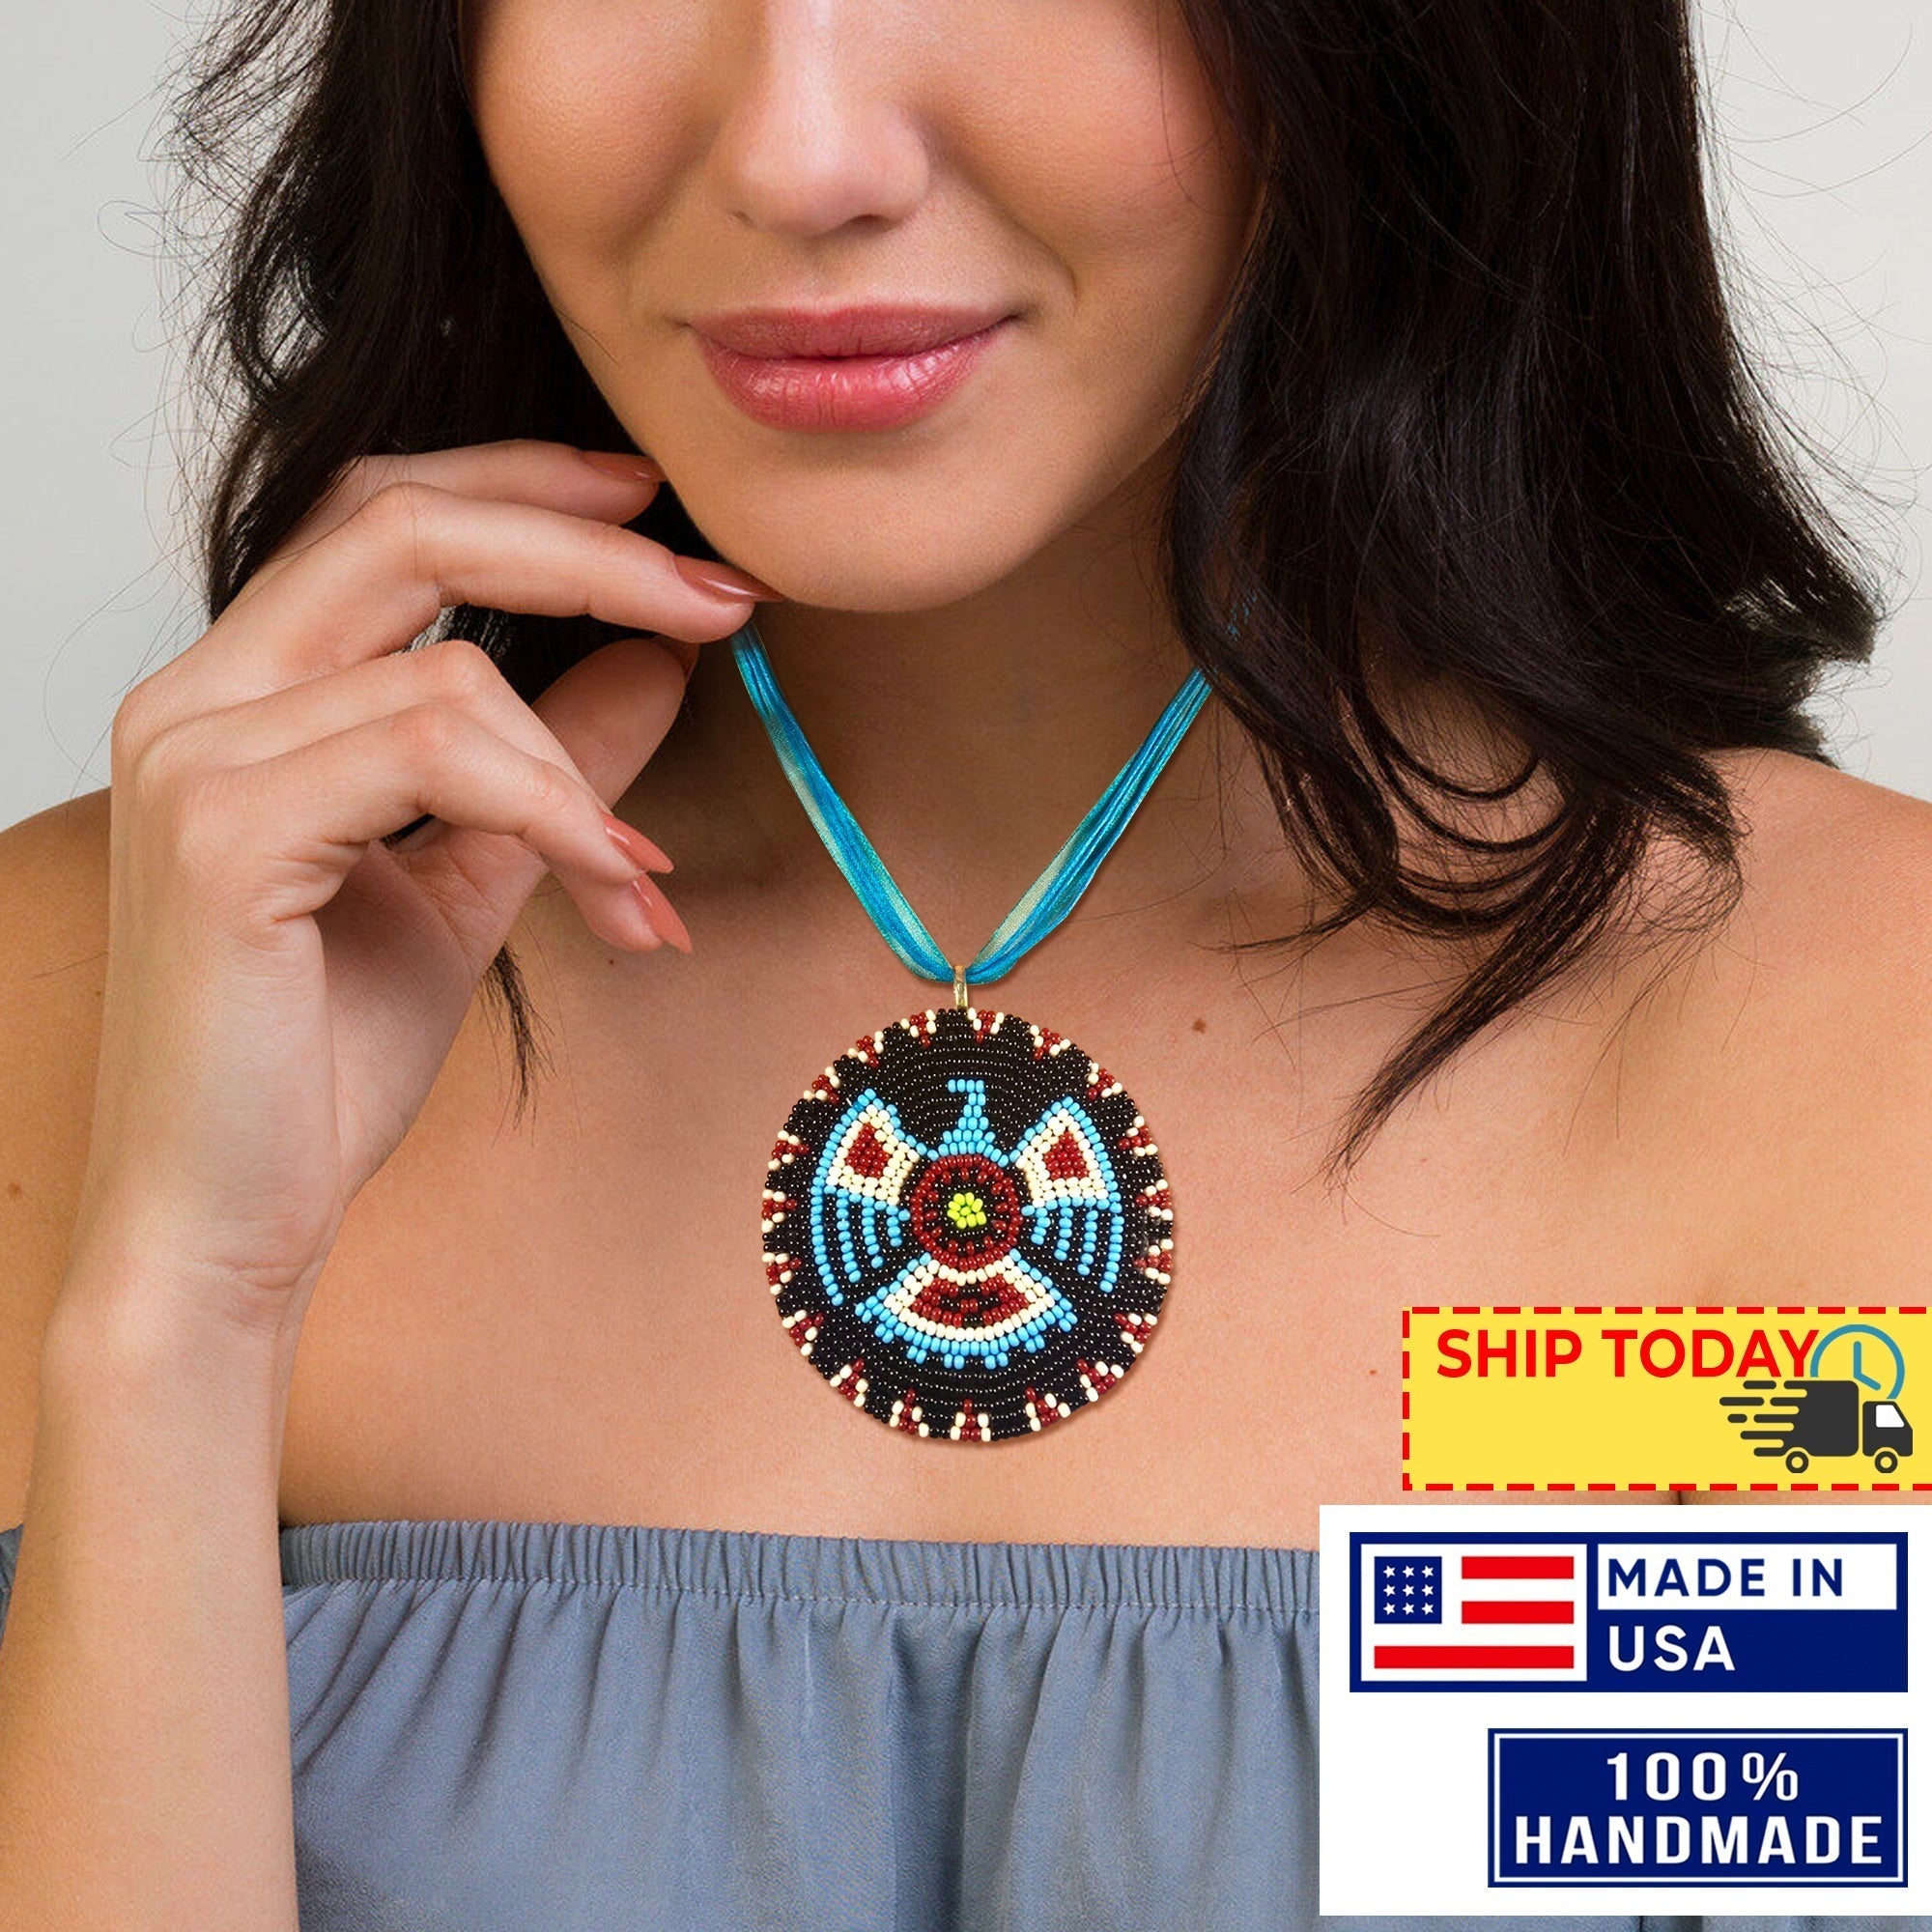 SALE 50% OFF - Handmade Beaded Eagle Turquoise Blue Black Organza Cord Necklace Unisex With Native American Style